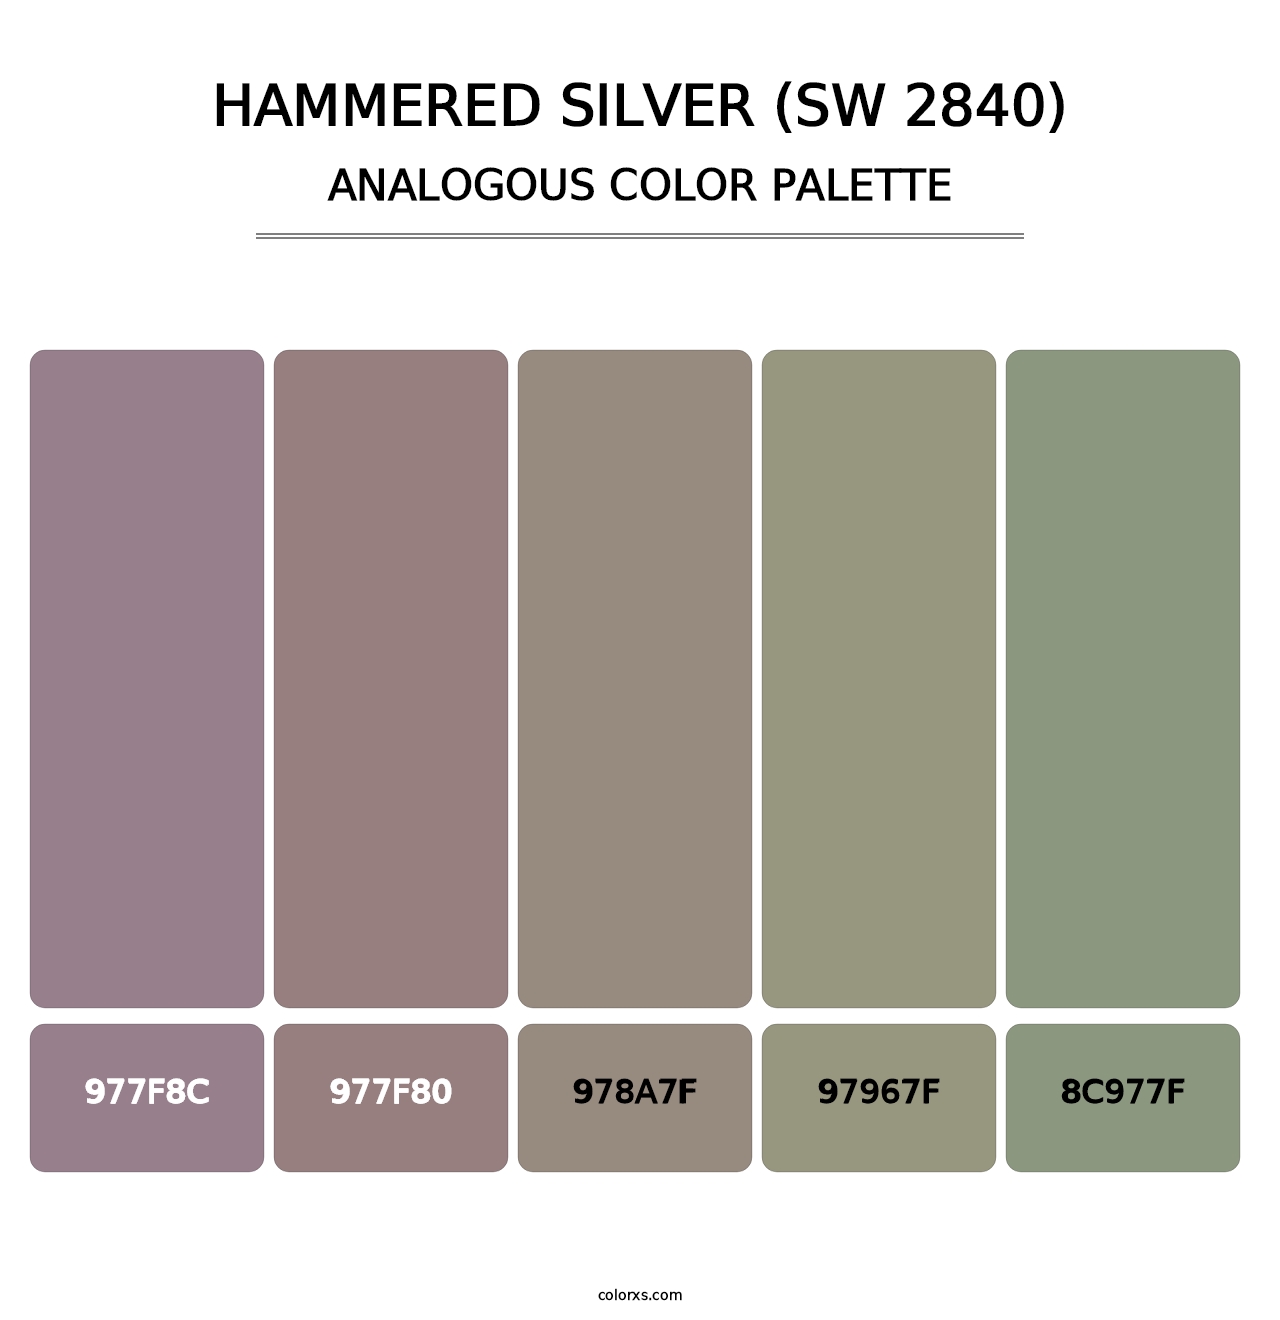 Hammered Silver (SW 2840) - Analogous Color Palette